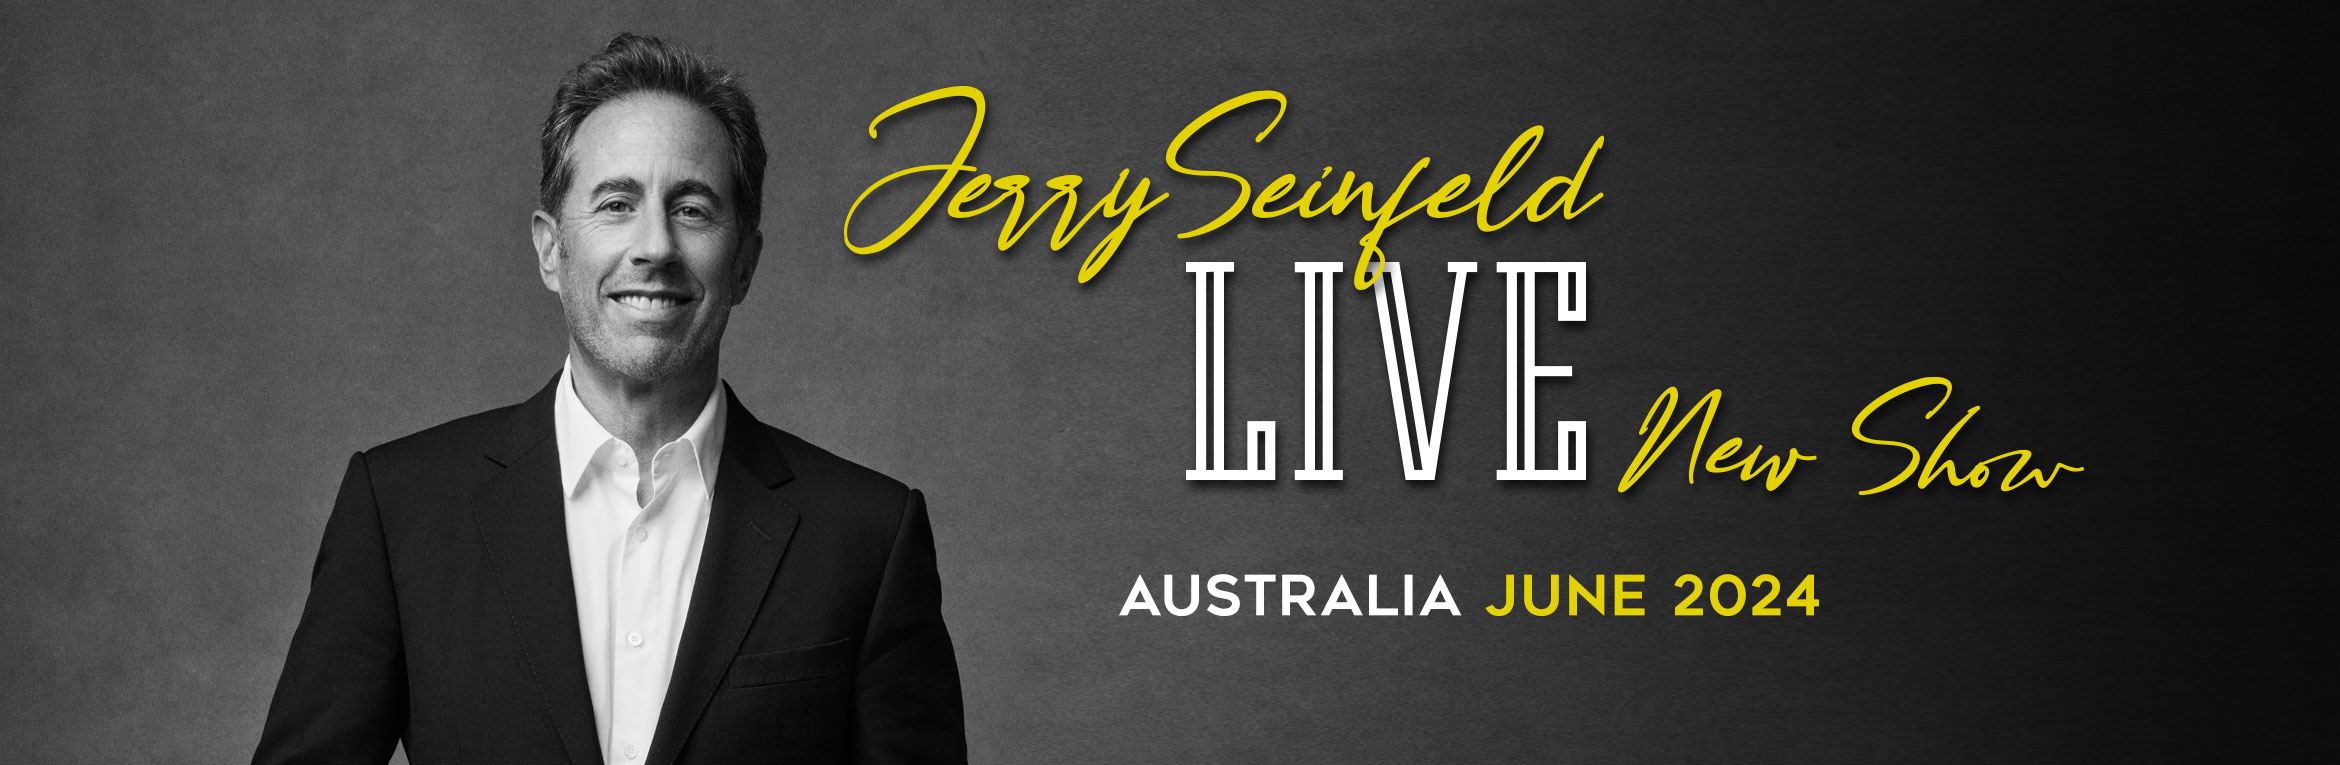 COMEDY LEGEND JERRY SEINFELD RETURNS TO AUSTRALIA IN JUNE 2024 FOR A